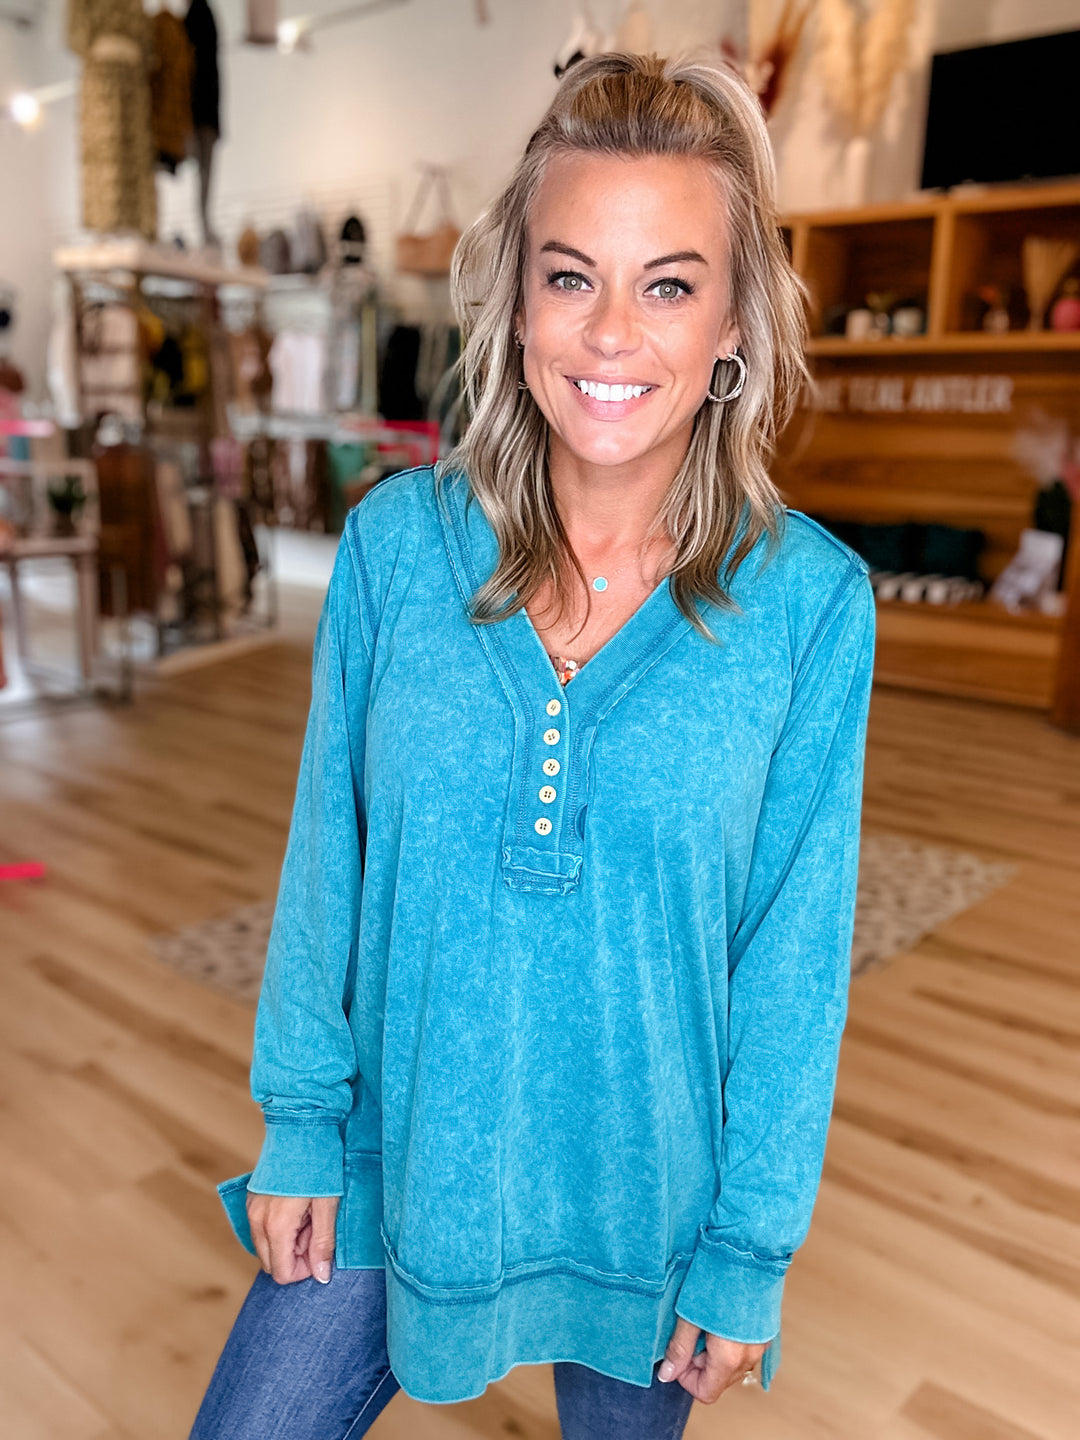 Cozy in Style - The Teal Antler Boutique